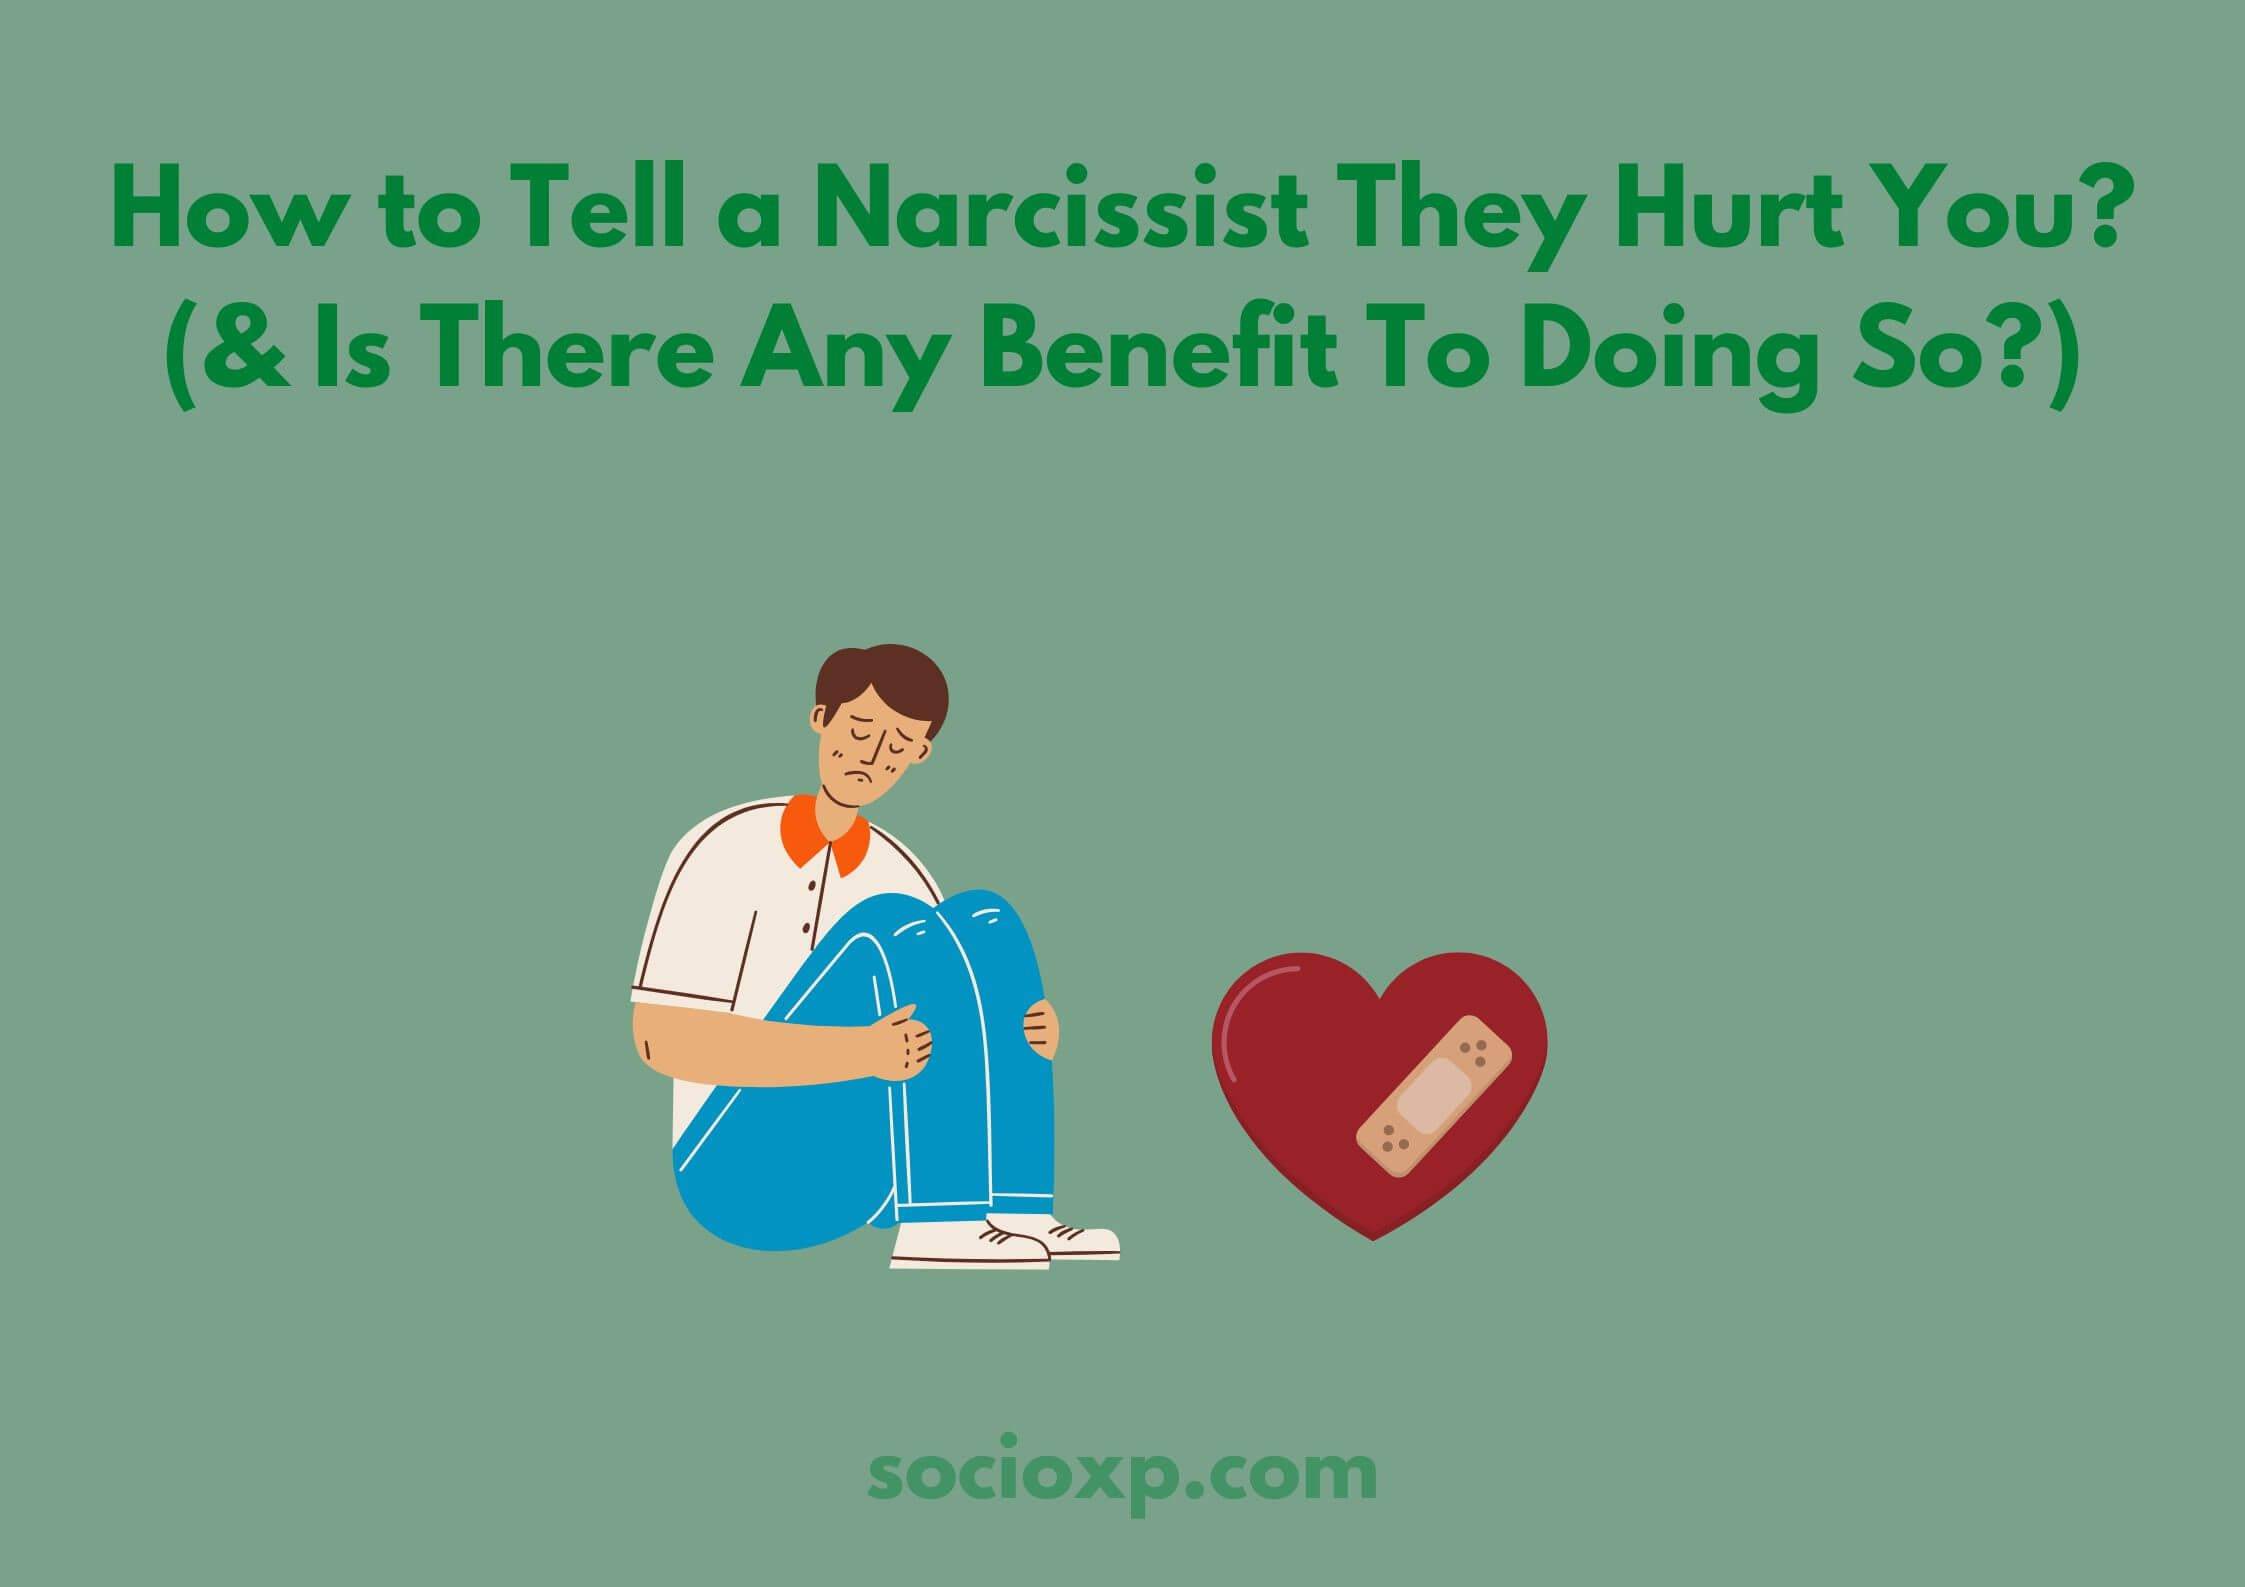 How to Tell a Narcissist They Hurt You? (& Is There Any Benefit To Doing So?)